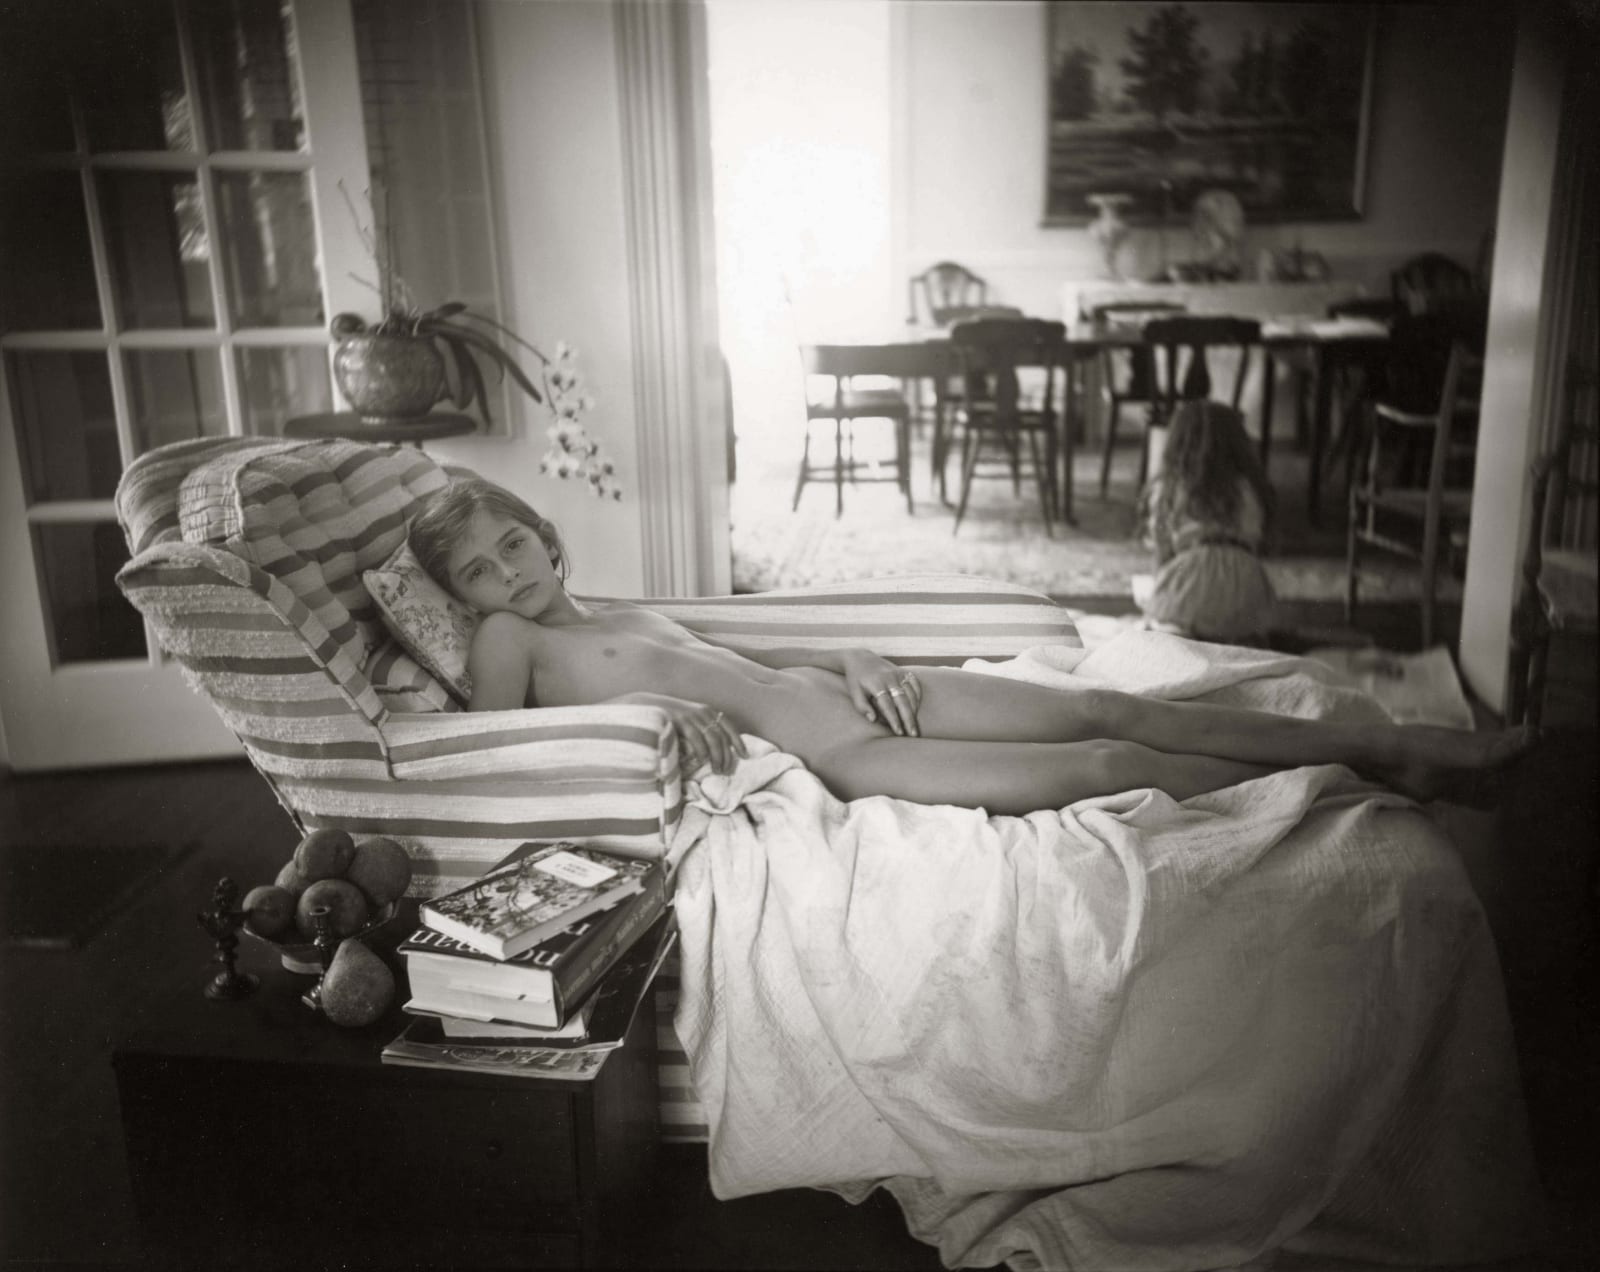 Jessie reclining on couch in pose evoking Titian's Venus of Urbino, from the Immediate Family series, by Sally Mann